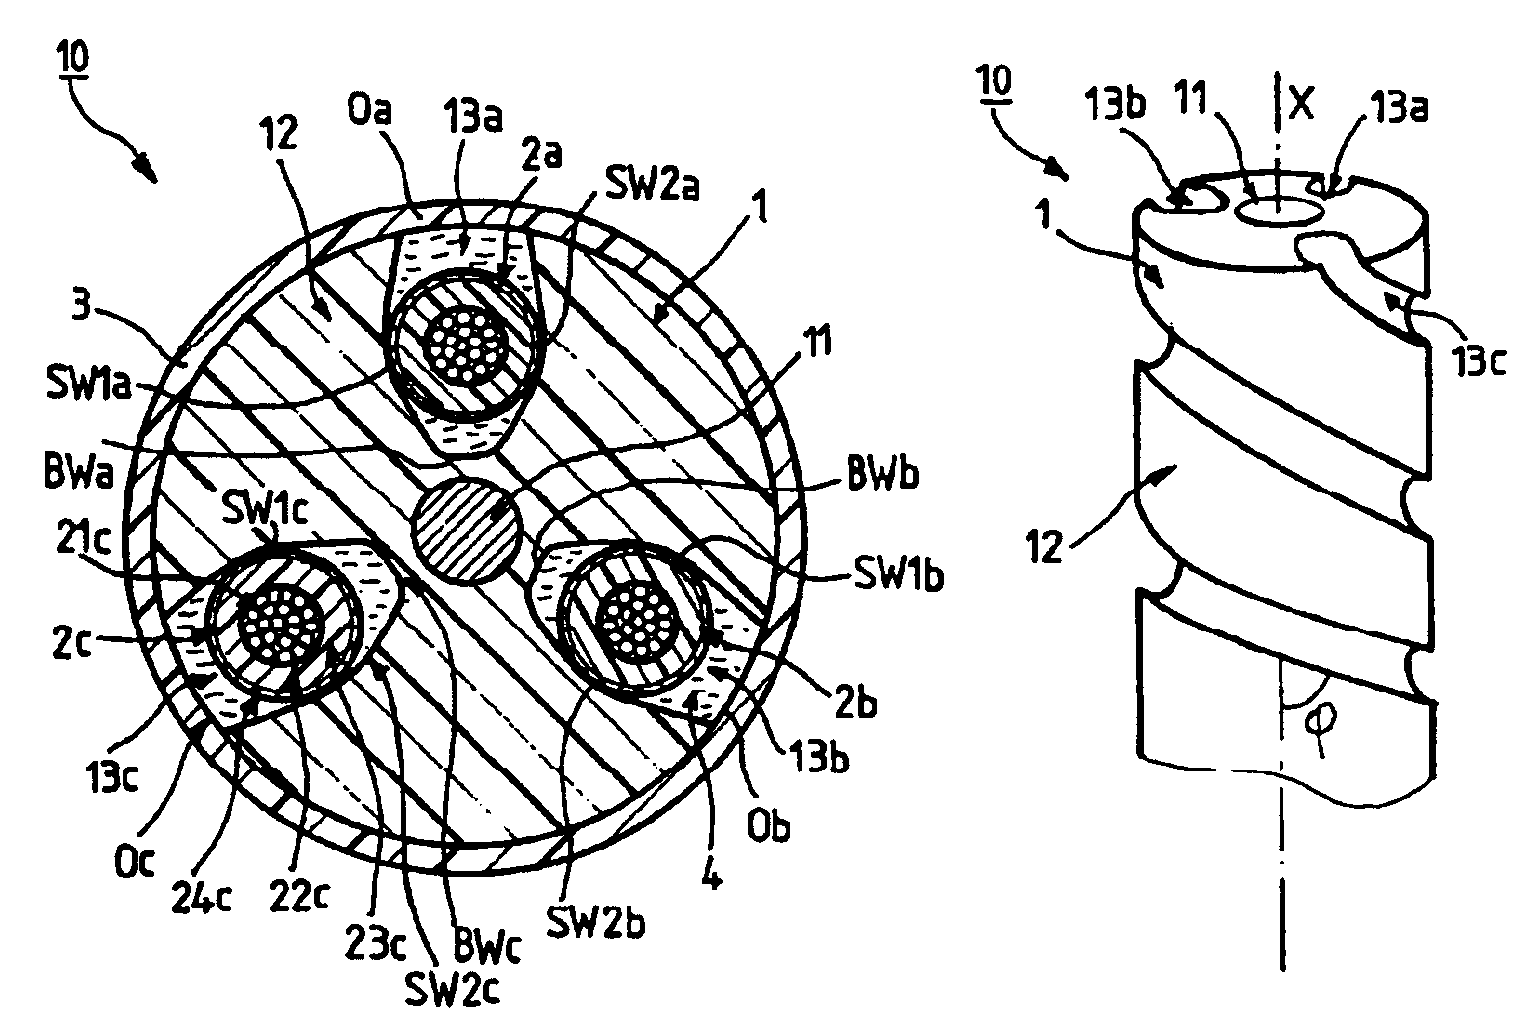 Flexible electrical elongated device suitable for service in a high mechanical load environment